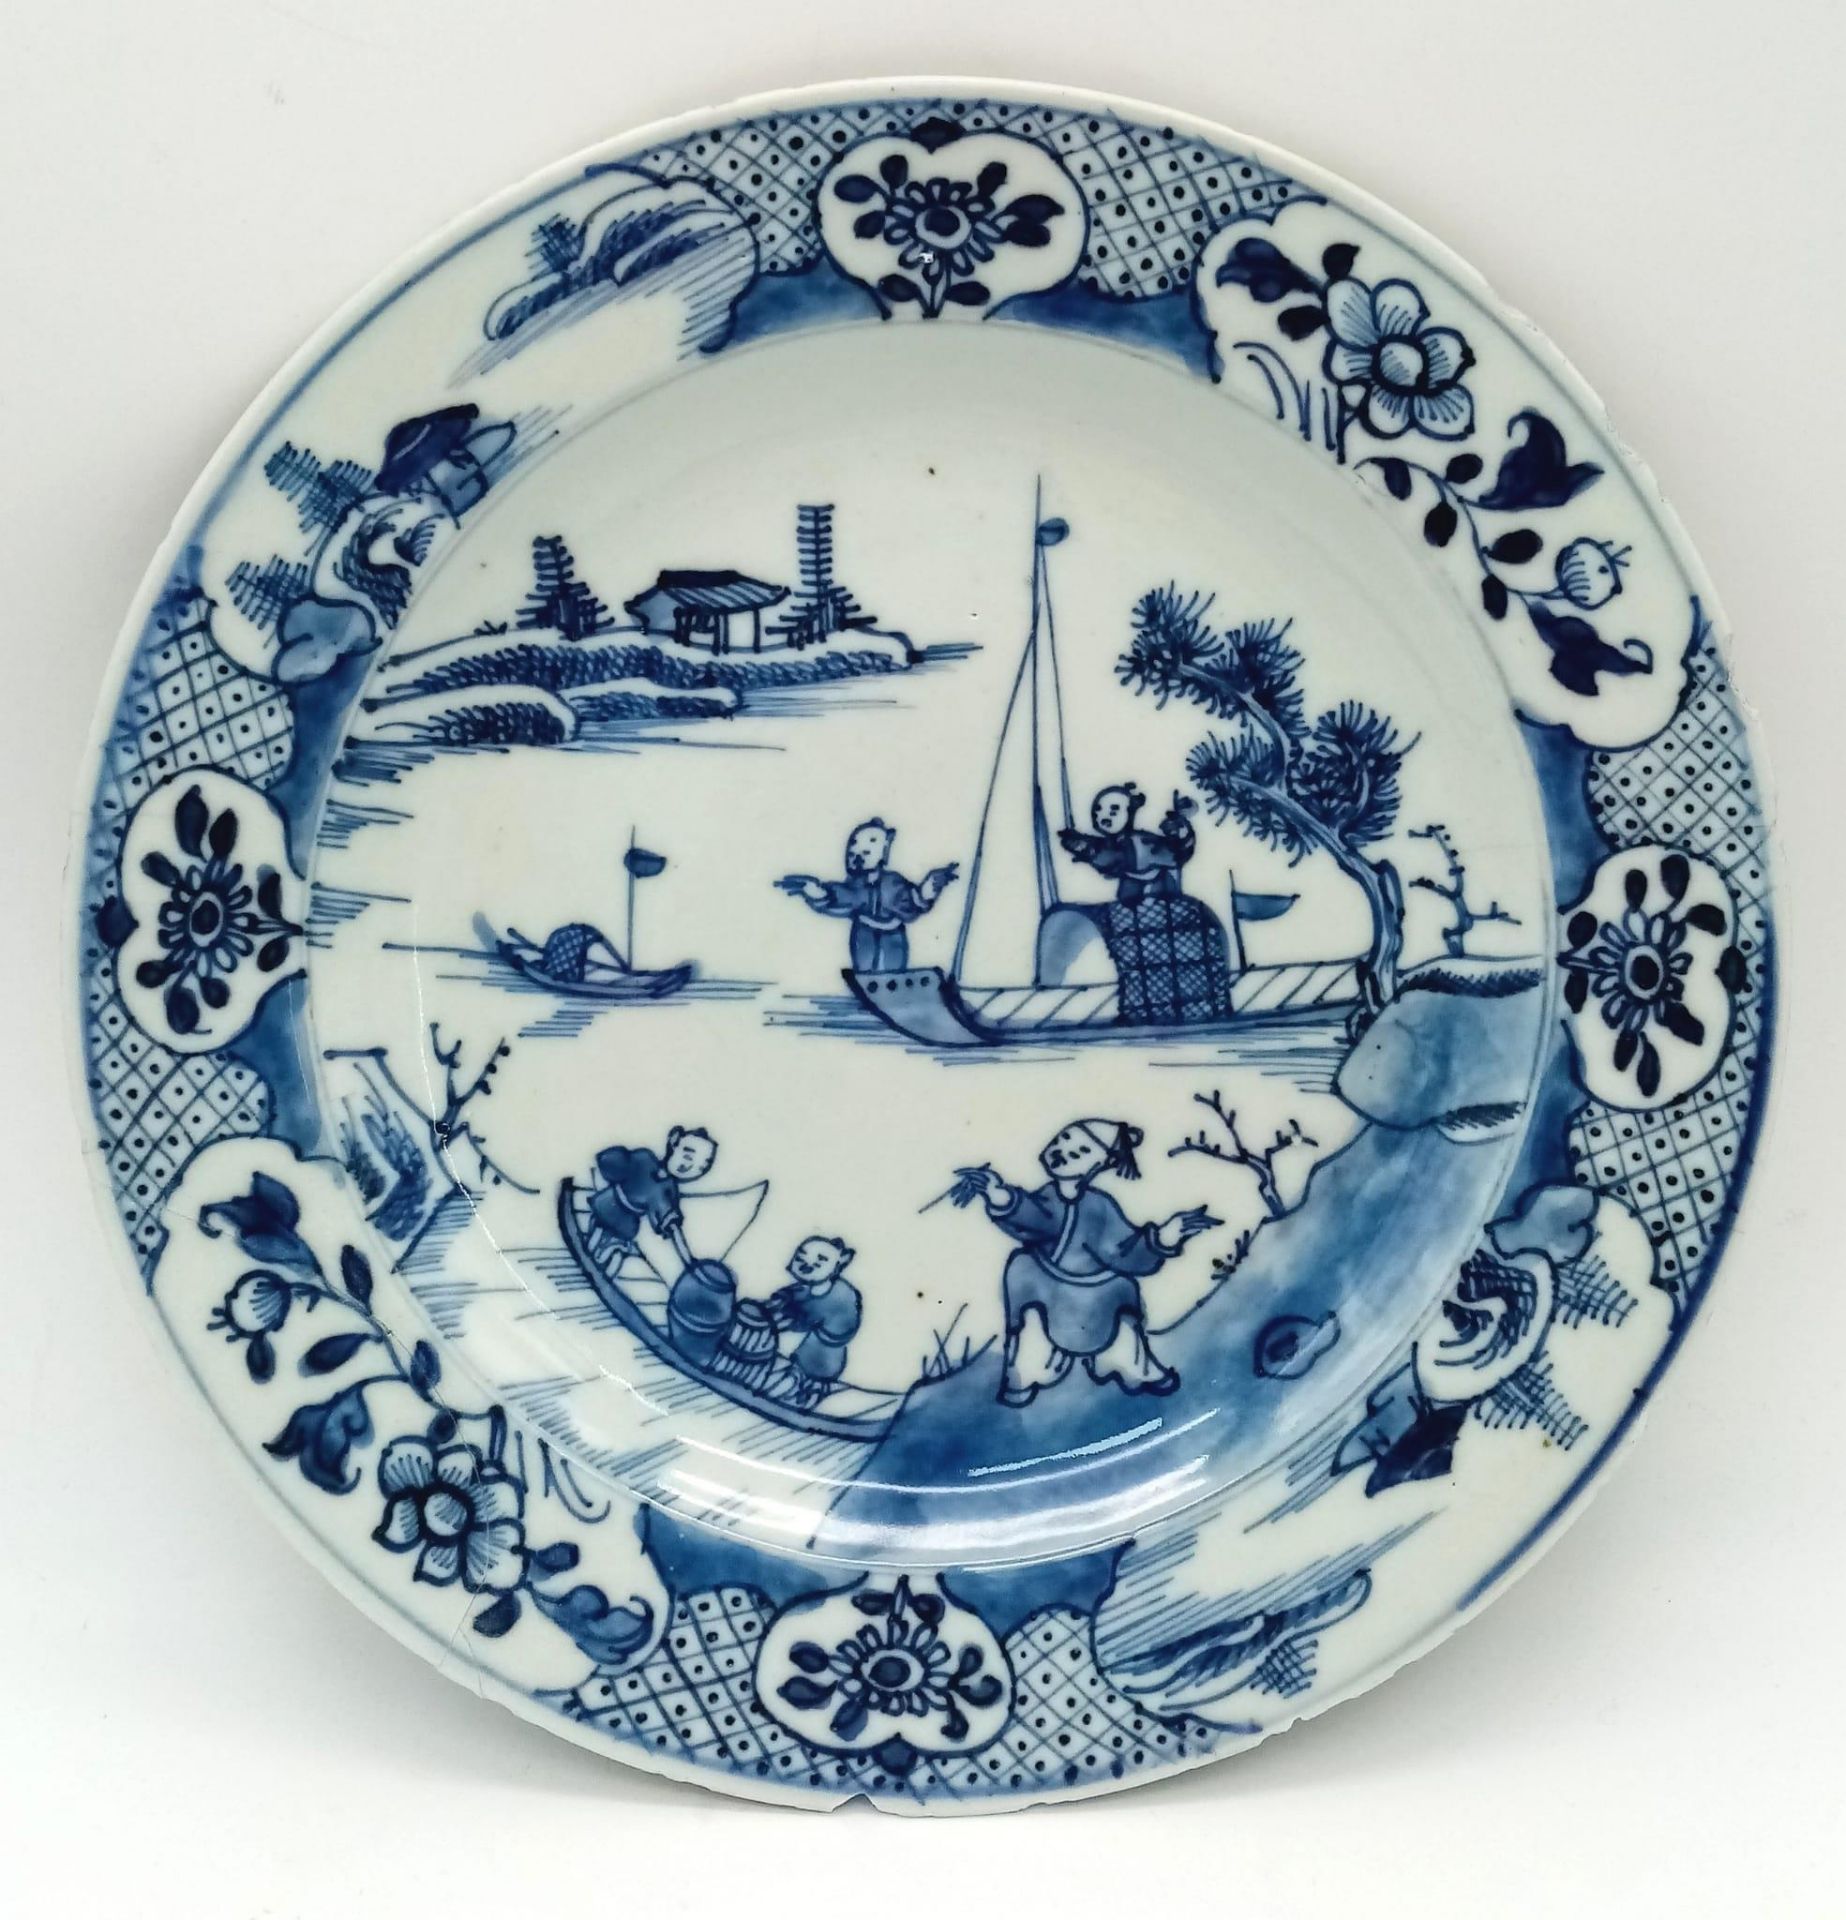 An 18th Century Chinese Blue and White Ceramic Plate. Has been repaired so a/f.